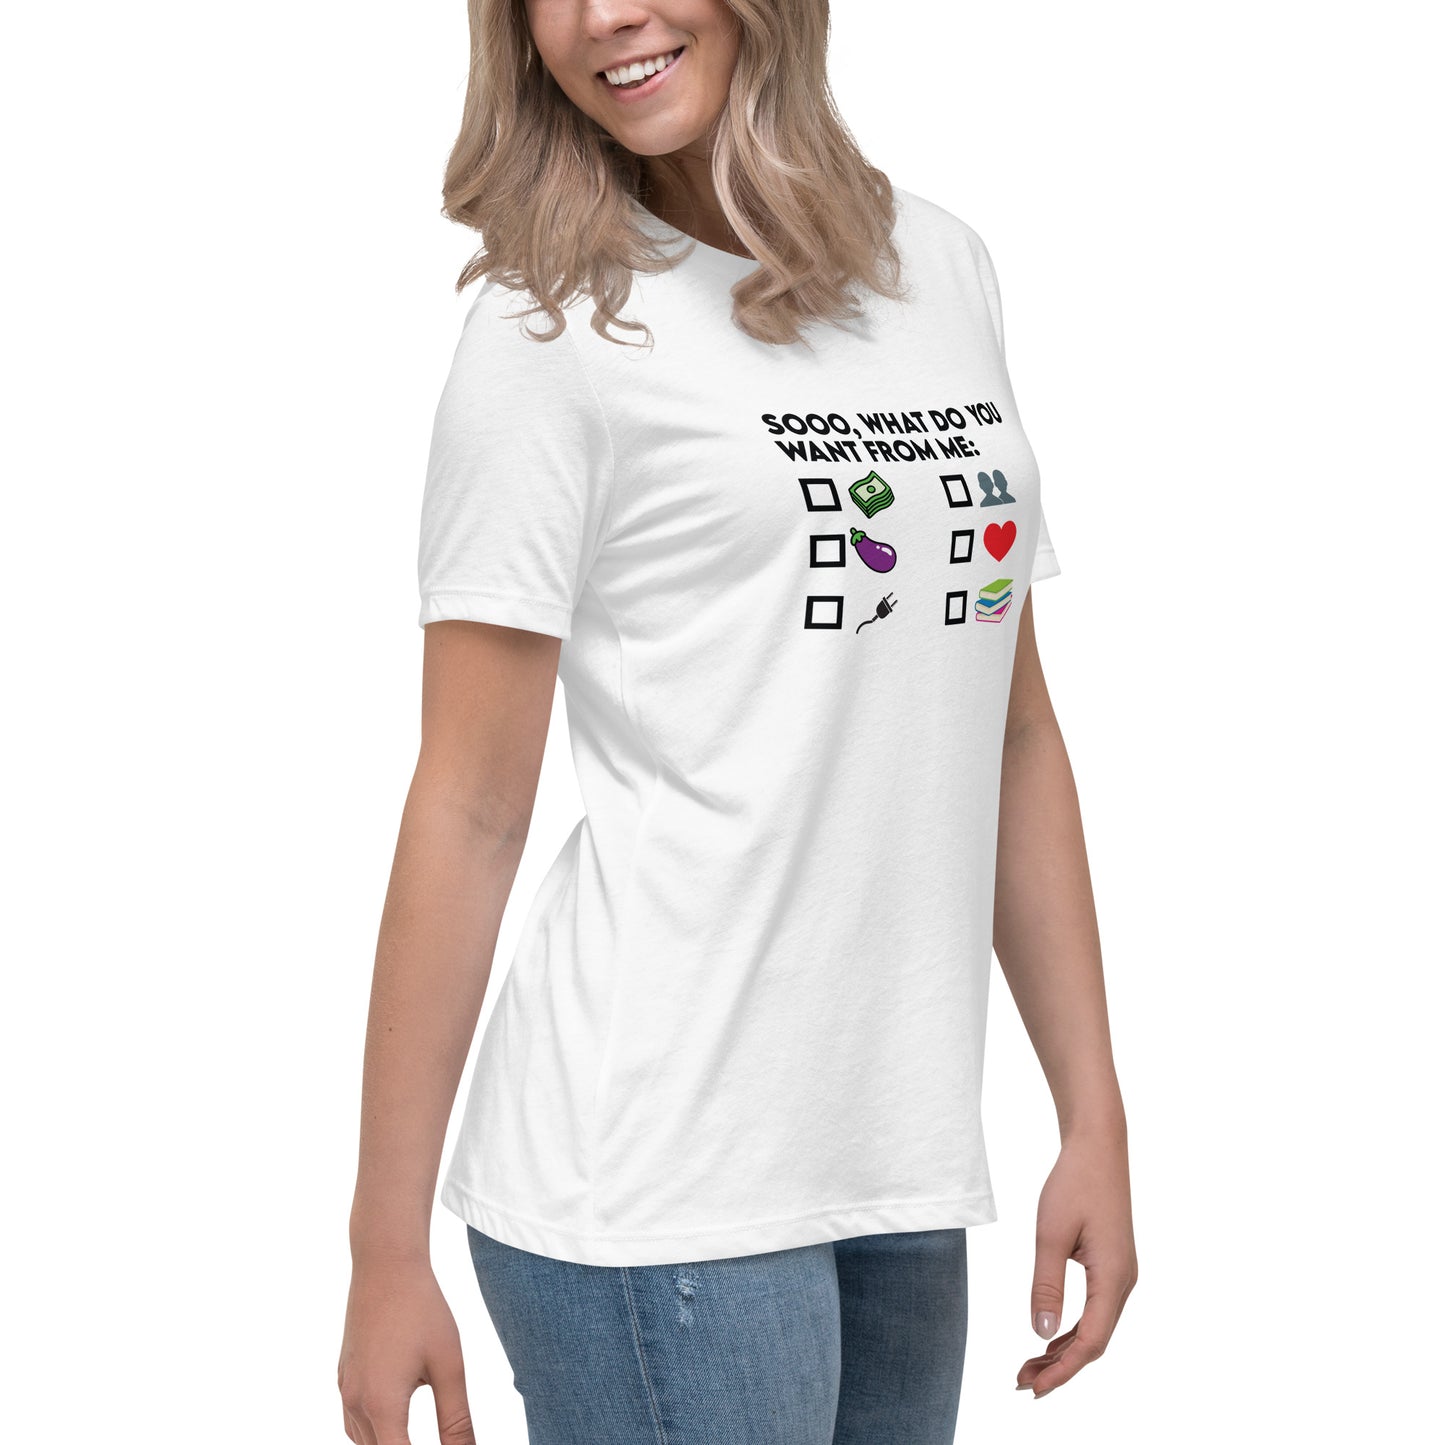 Women's What Do You Want From ME T-Shirt